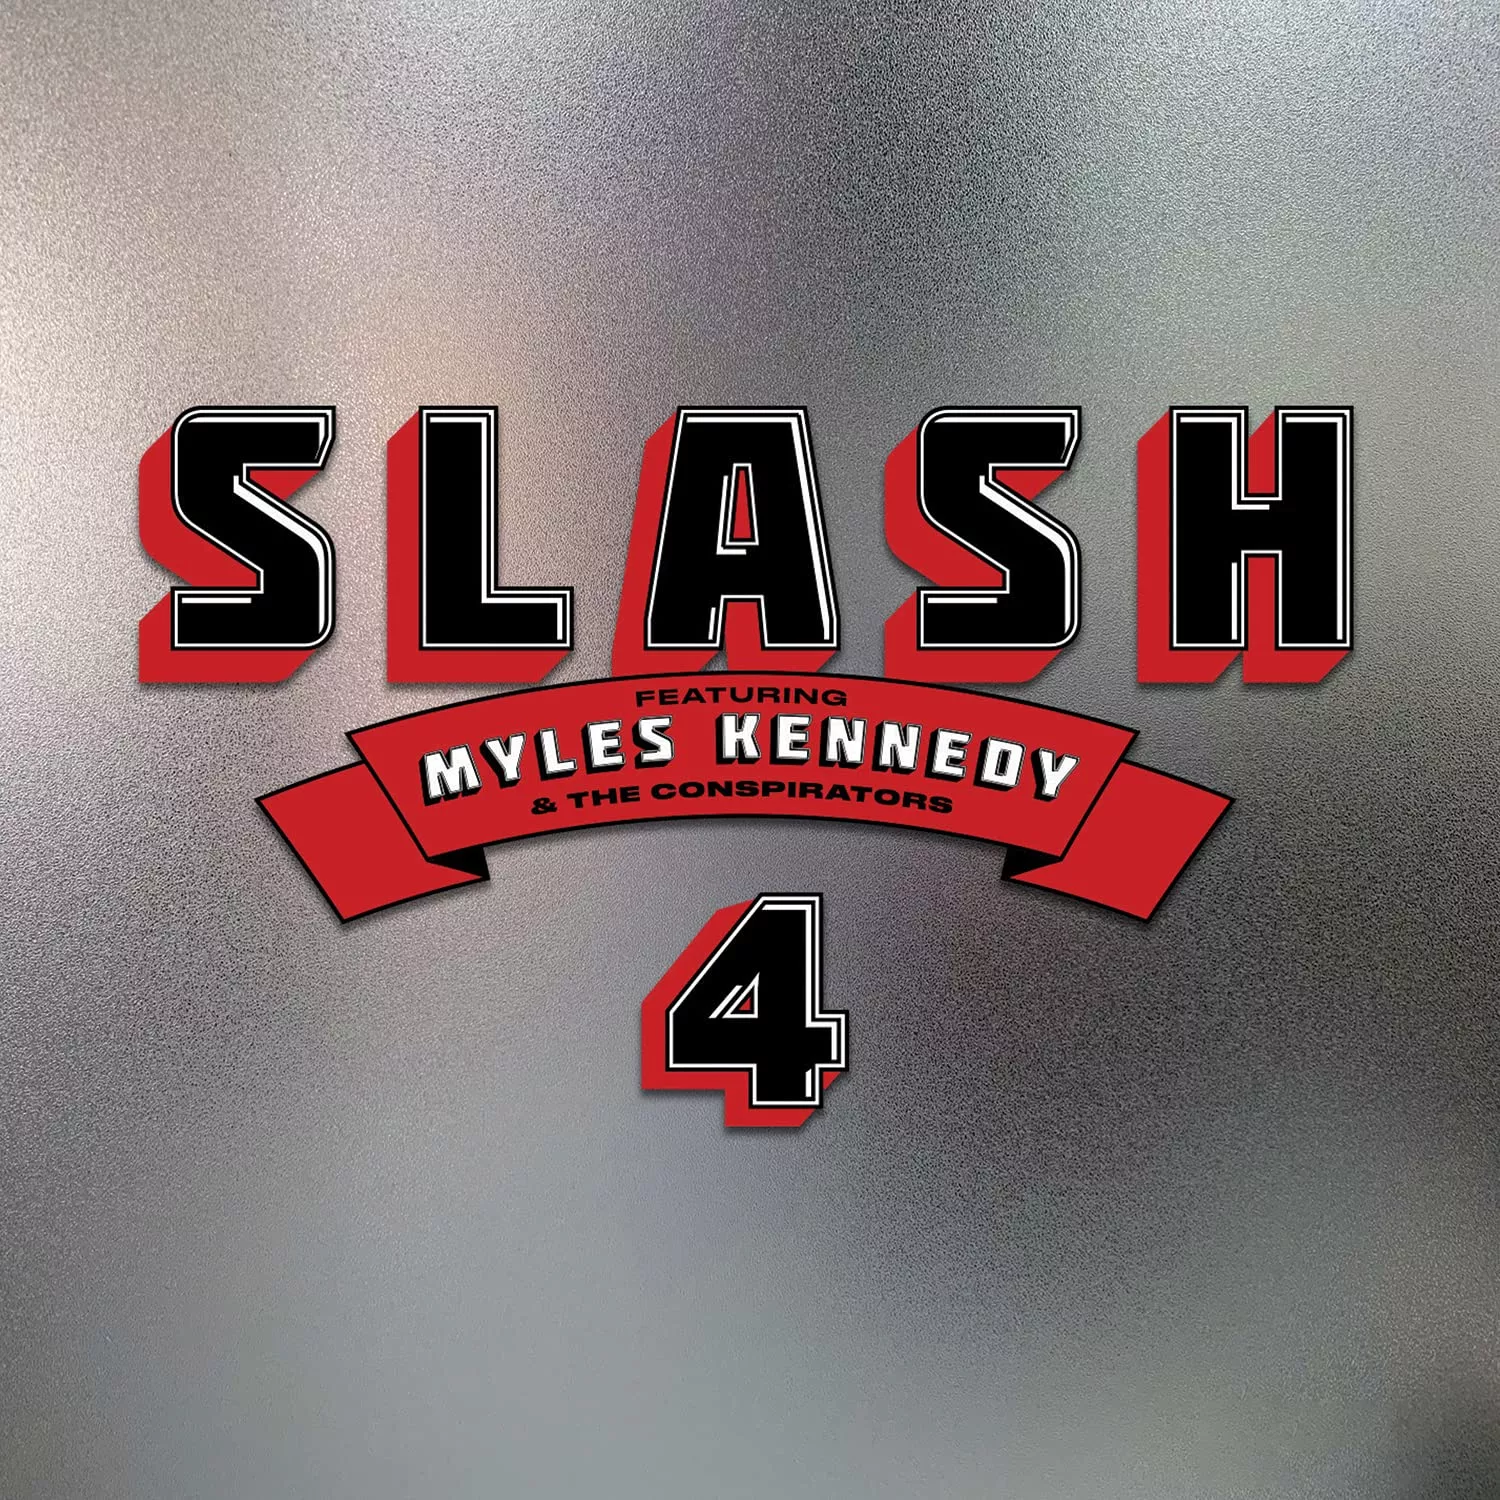 4 - Slash featuring Myles Kennedy and the Conspirators